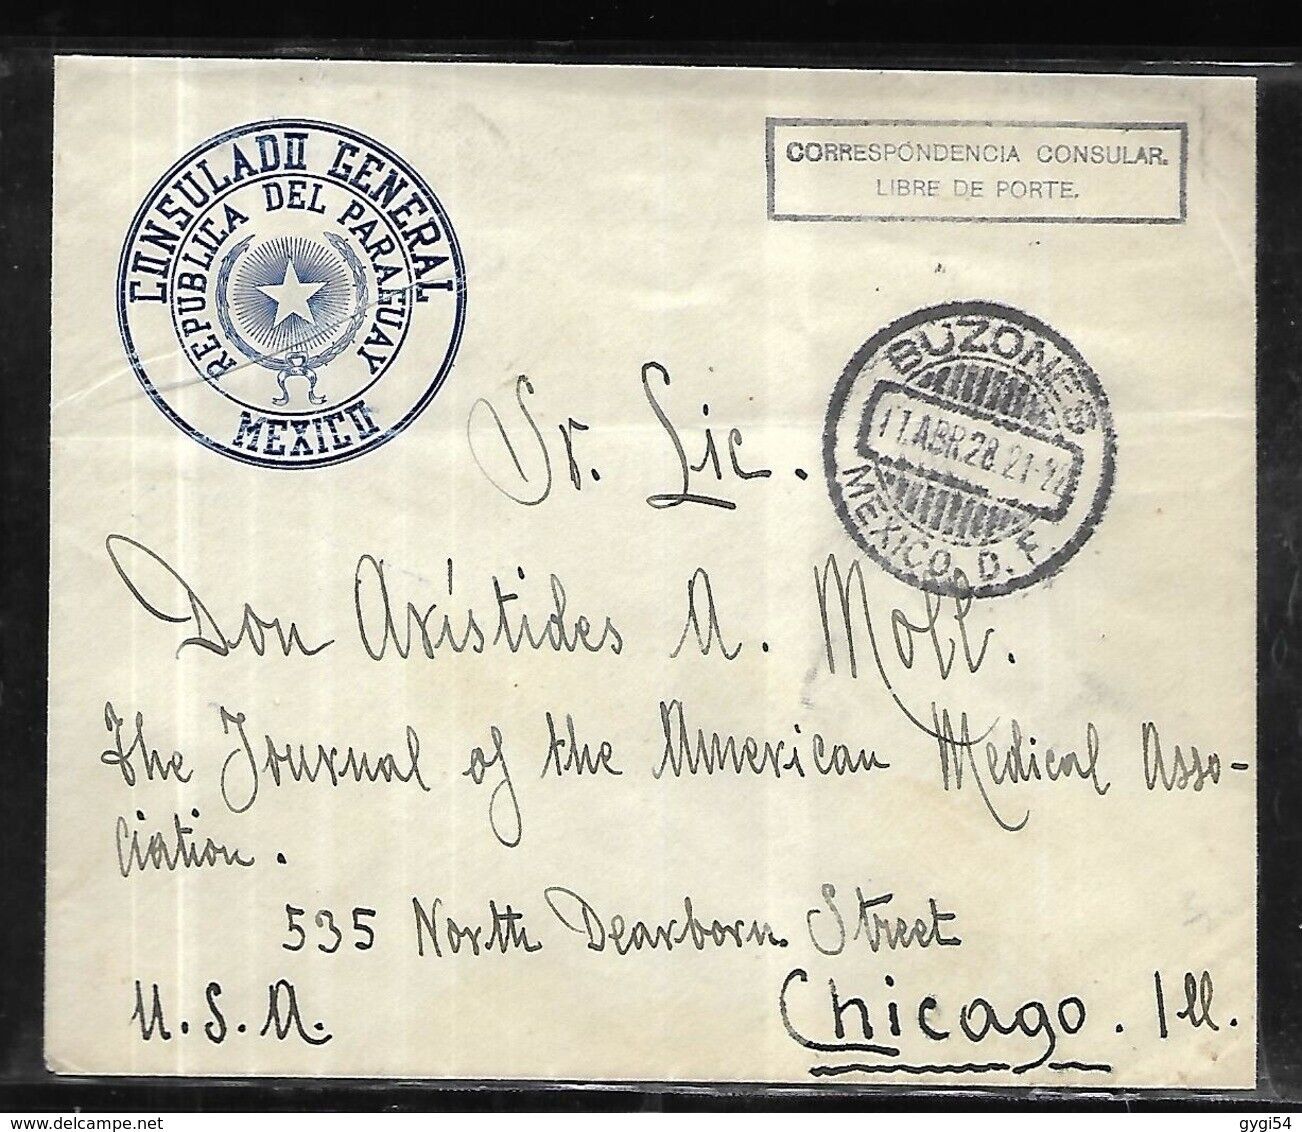 MEXICO Consular Letter from Mexico to Paraguay for Chicago April 11, 1928